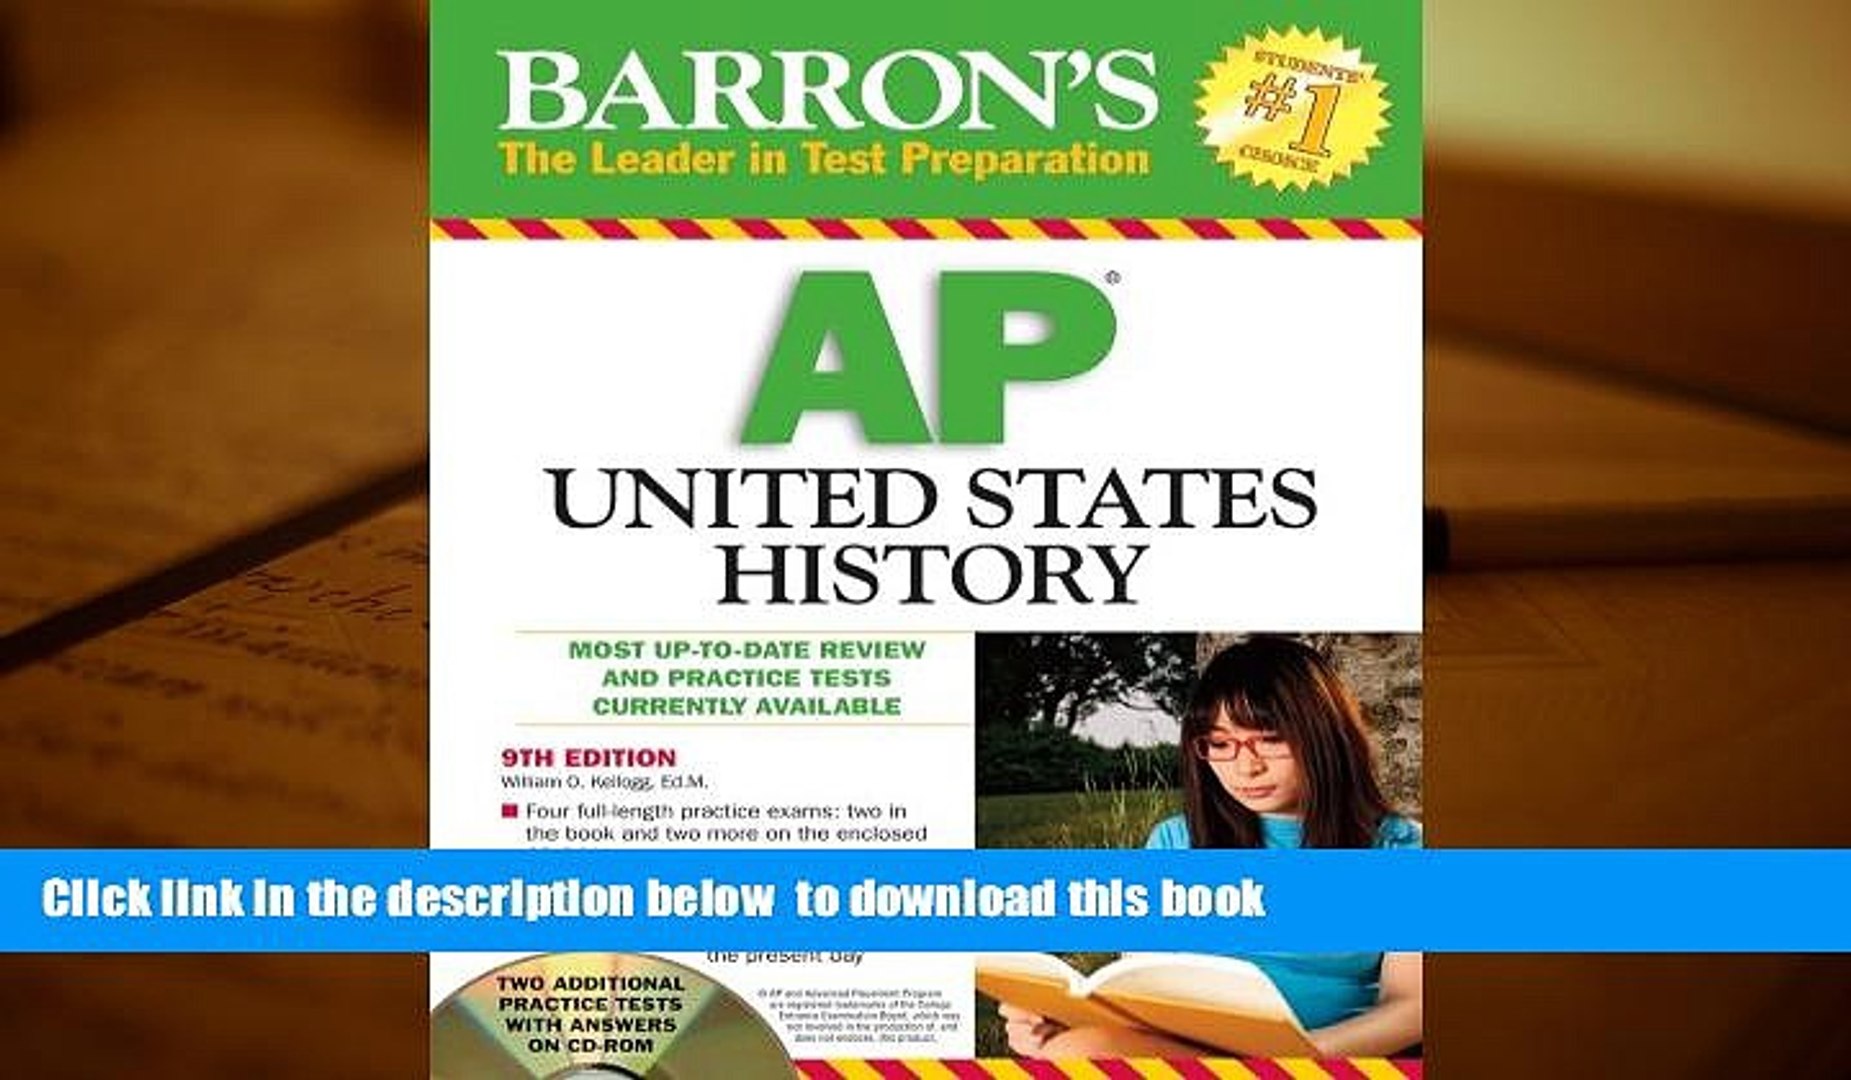 Barron's AP United States History: A Great Resource for Students who Want to Learn About the History